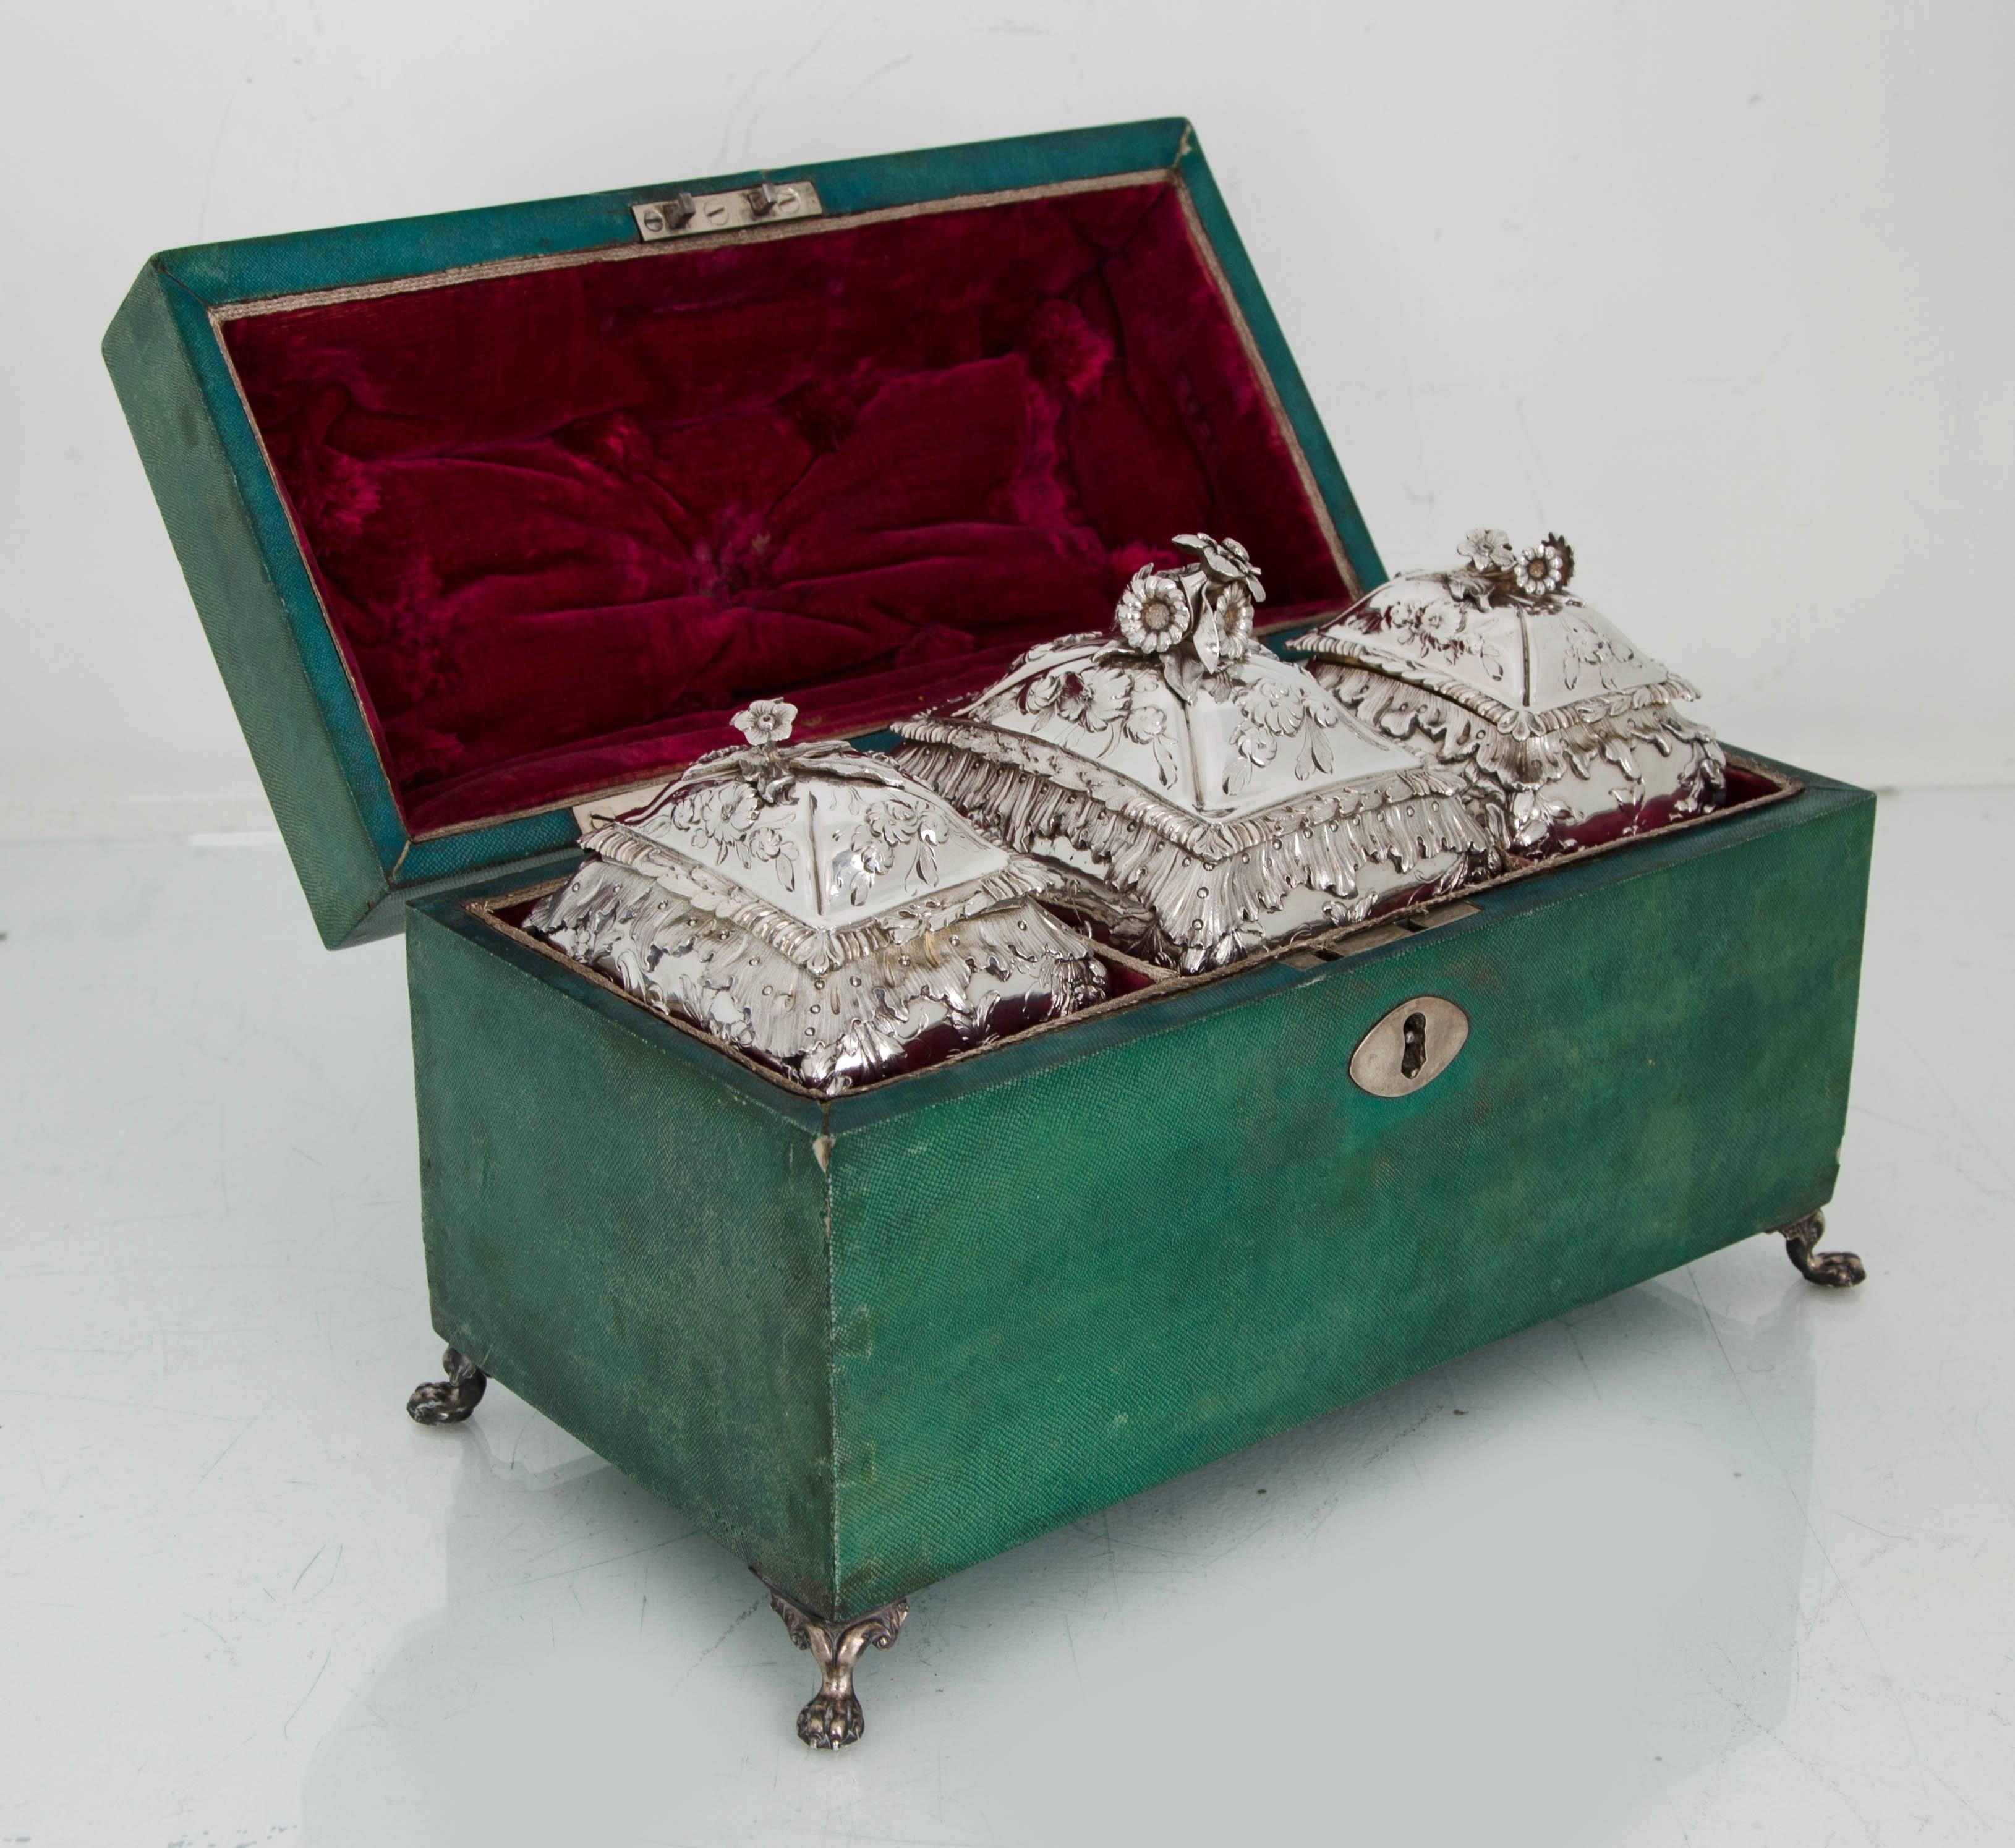 Suite of three George III 18th/19th Rococo silver tea caddies in green shagreen box London 1764/1810 Thomas Foster and William Pitts.
 
A strikingly beautiful suite of three silver tea caddies rectangular with bombe sides. The caddies have